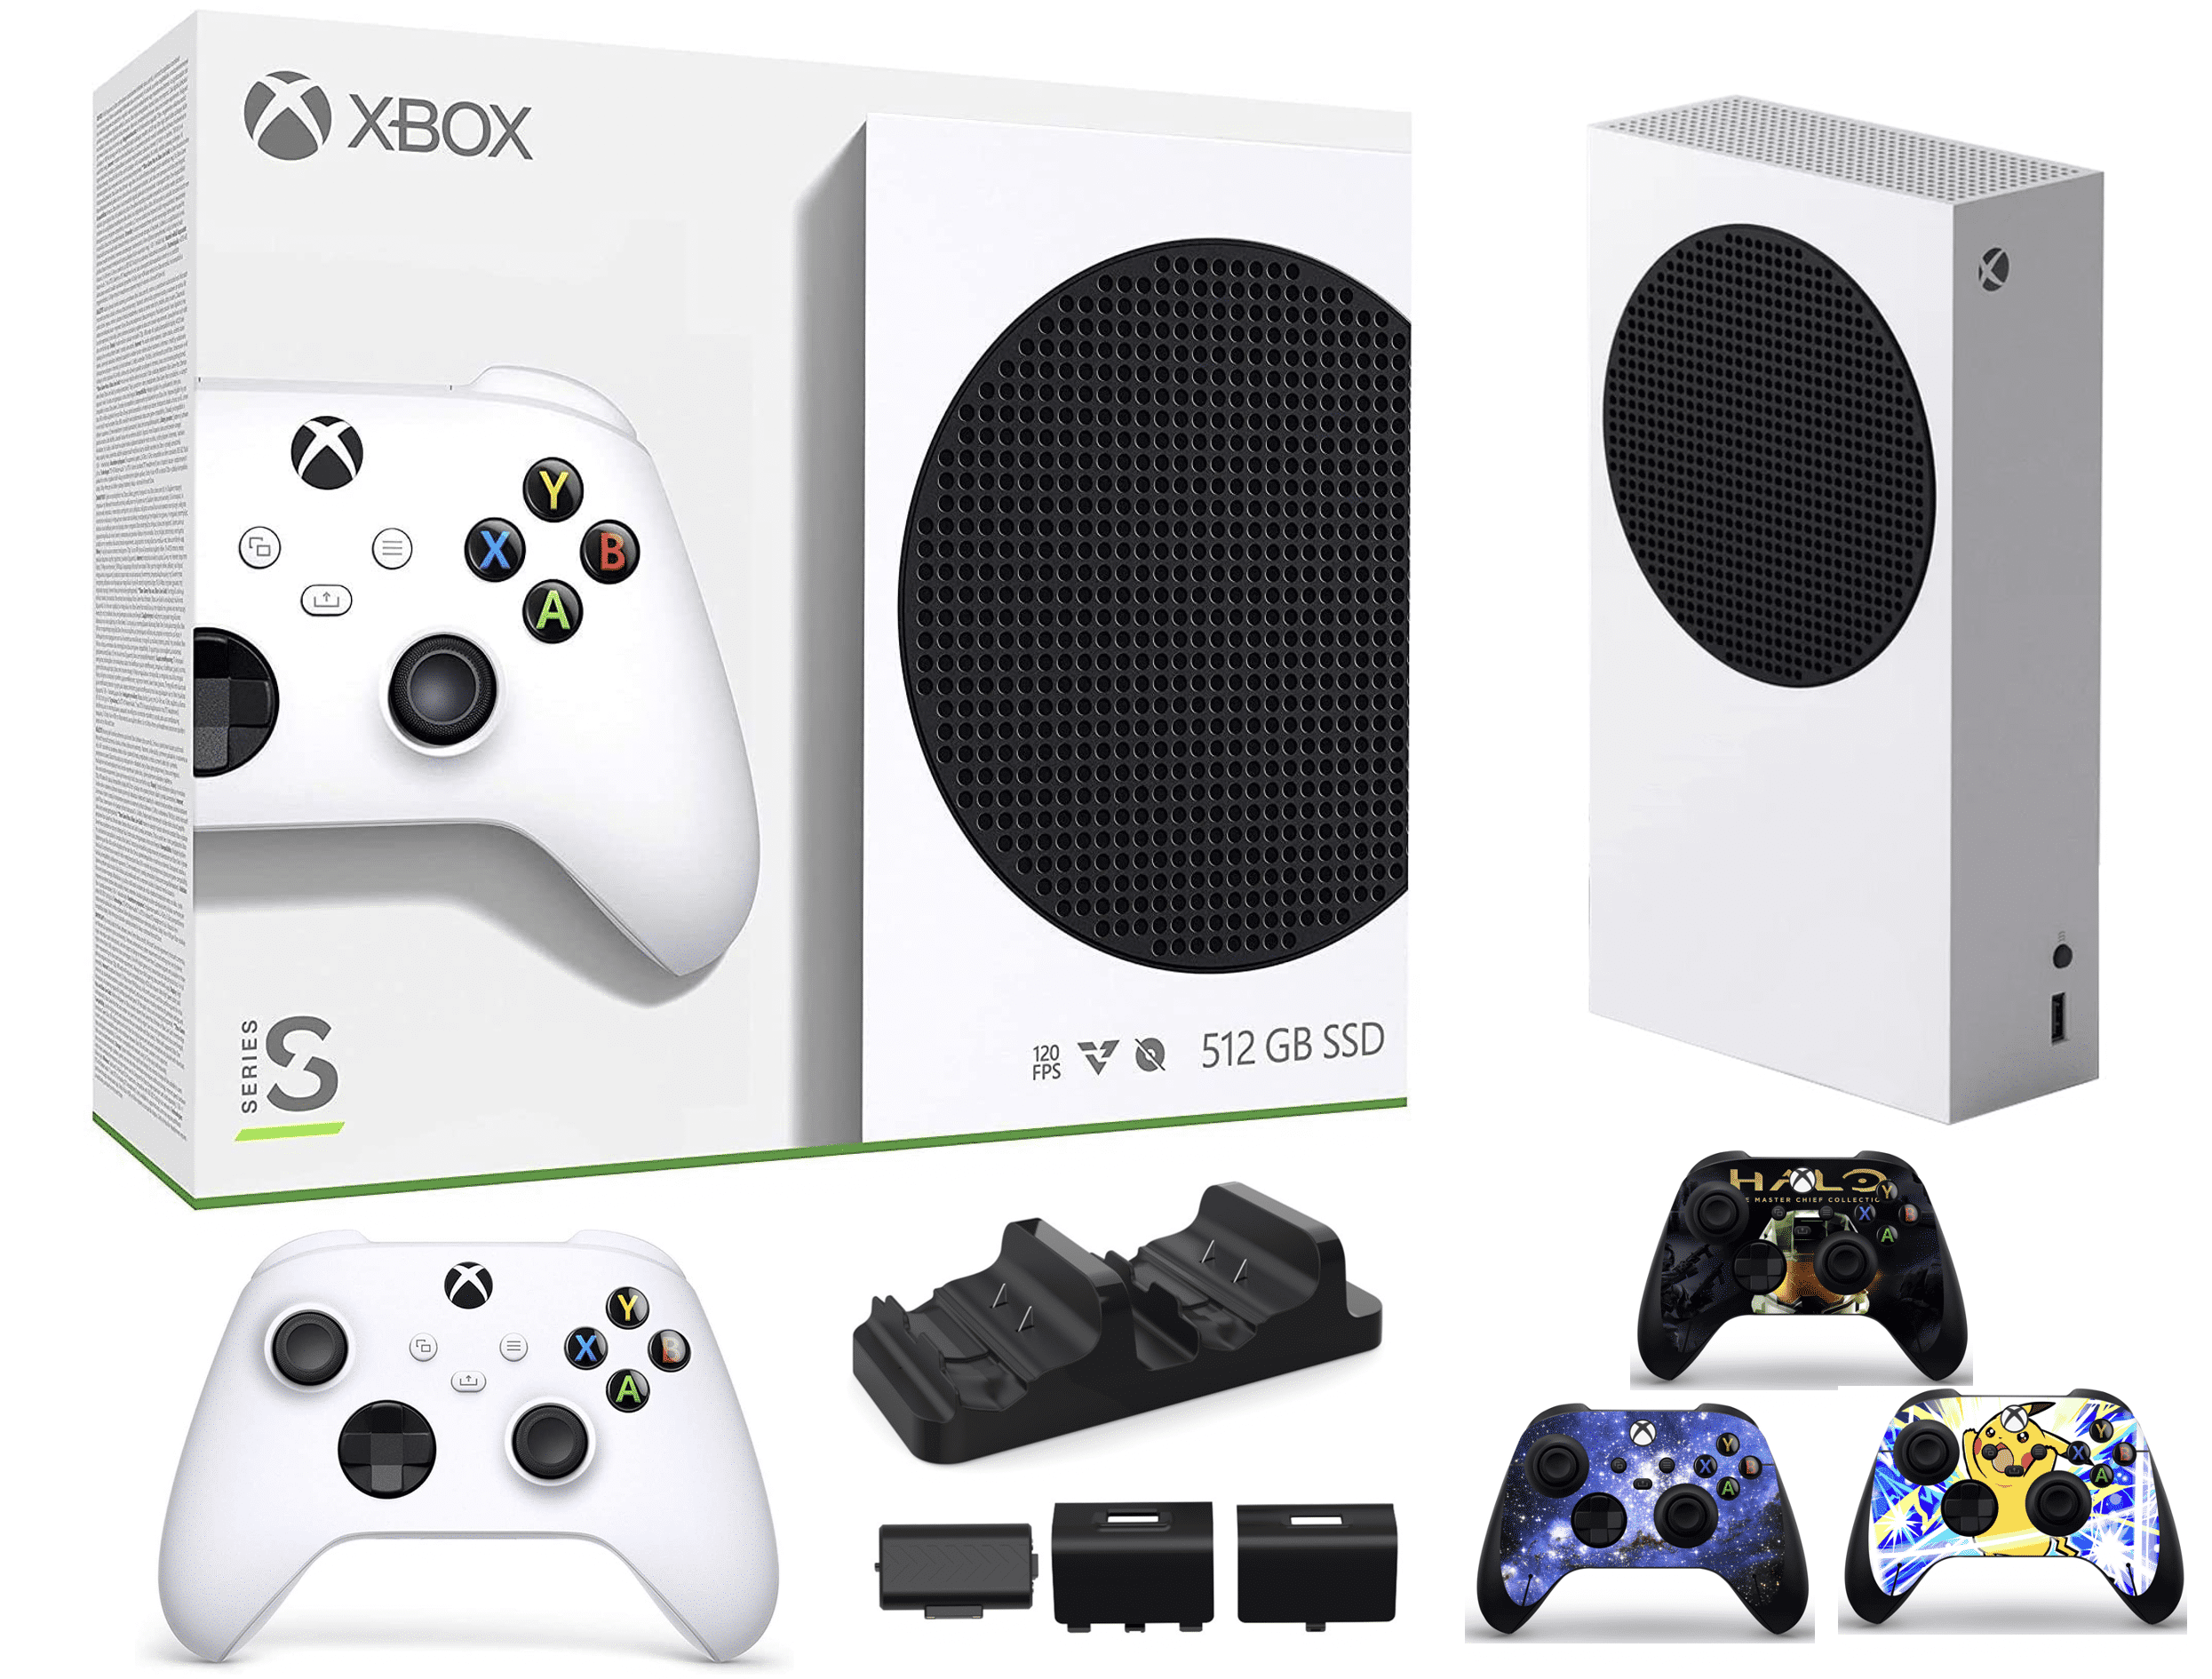 Microsoft Xbox One S 500GB Gaming Console White with Grand Theft Auto V  BOLT AXTION Bundle Like New